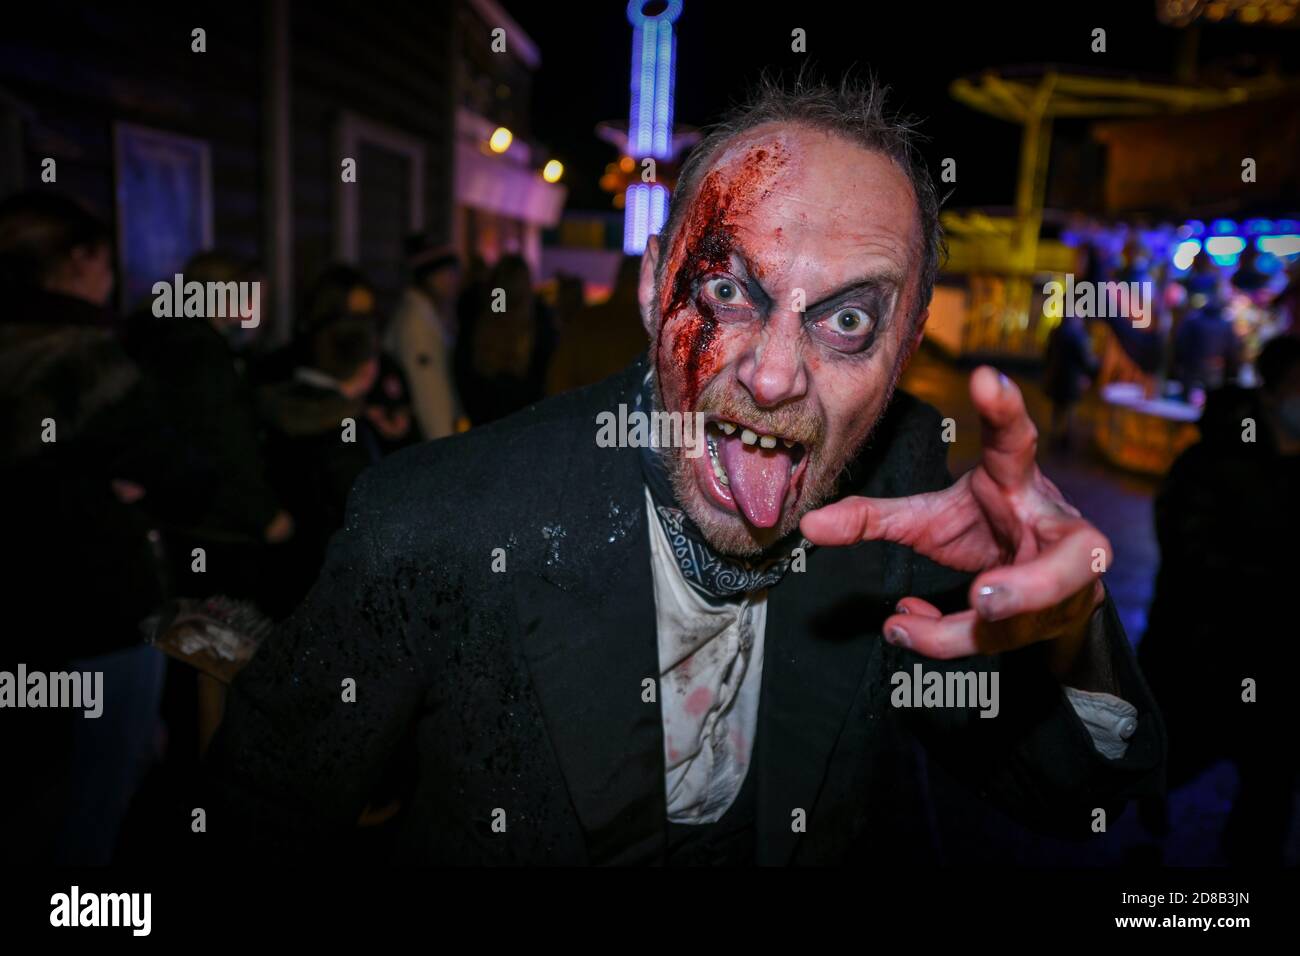 Great Yarmouth, UK. Wednesday 28 October 2020. Scare actors in Halloween costumes frighten guests at Pleasure Beach's Fairground Frights in Great Yarmouth. Credit: Thomas Faull/Alamy Live News Stock Photo